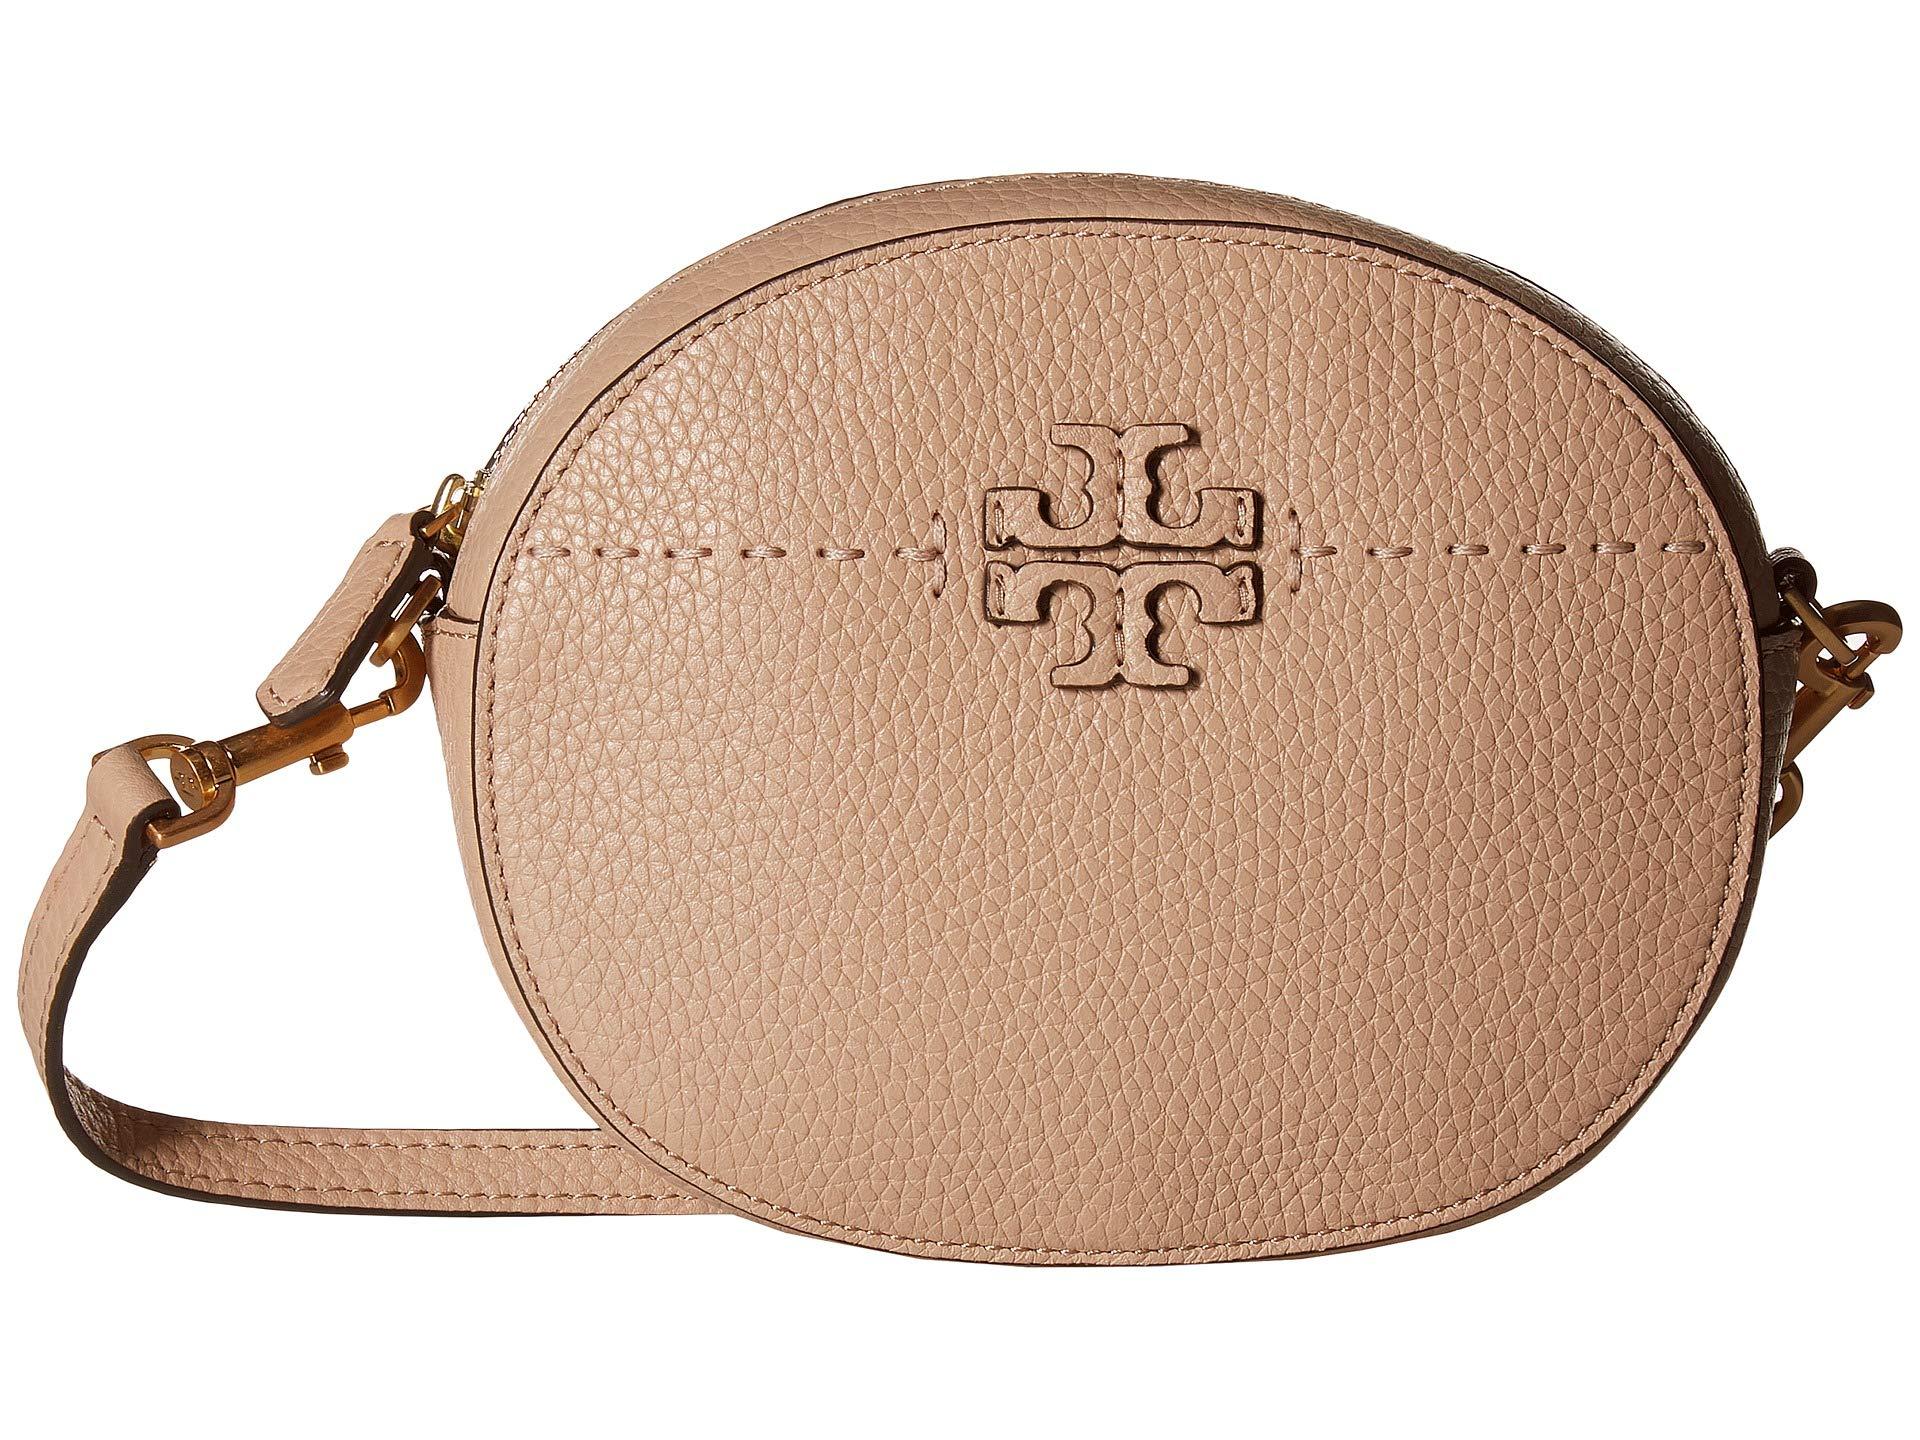 Tory Burch Mcgraw Convertible Round Belt Bag in Natural | Lyst